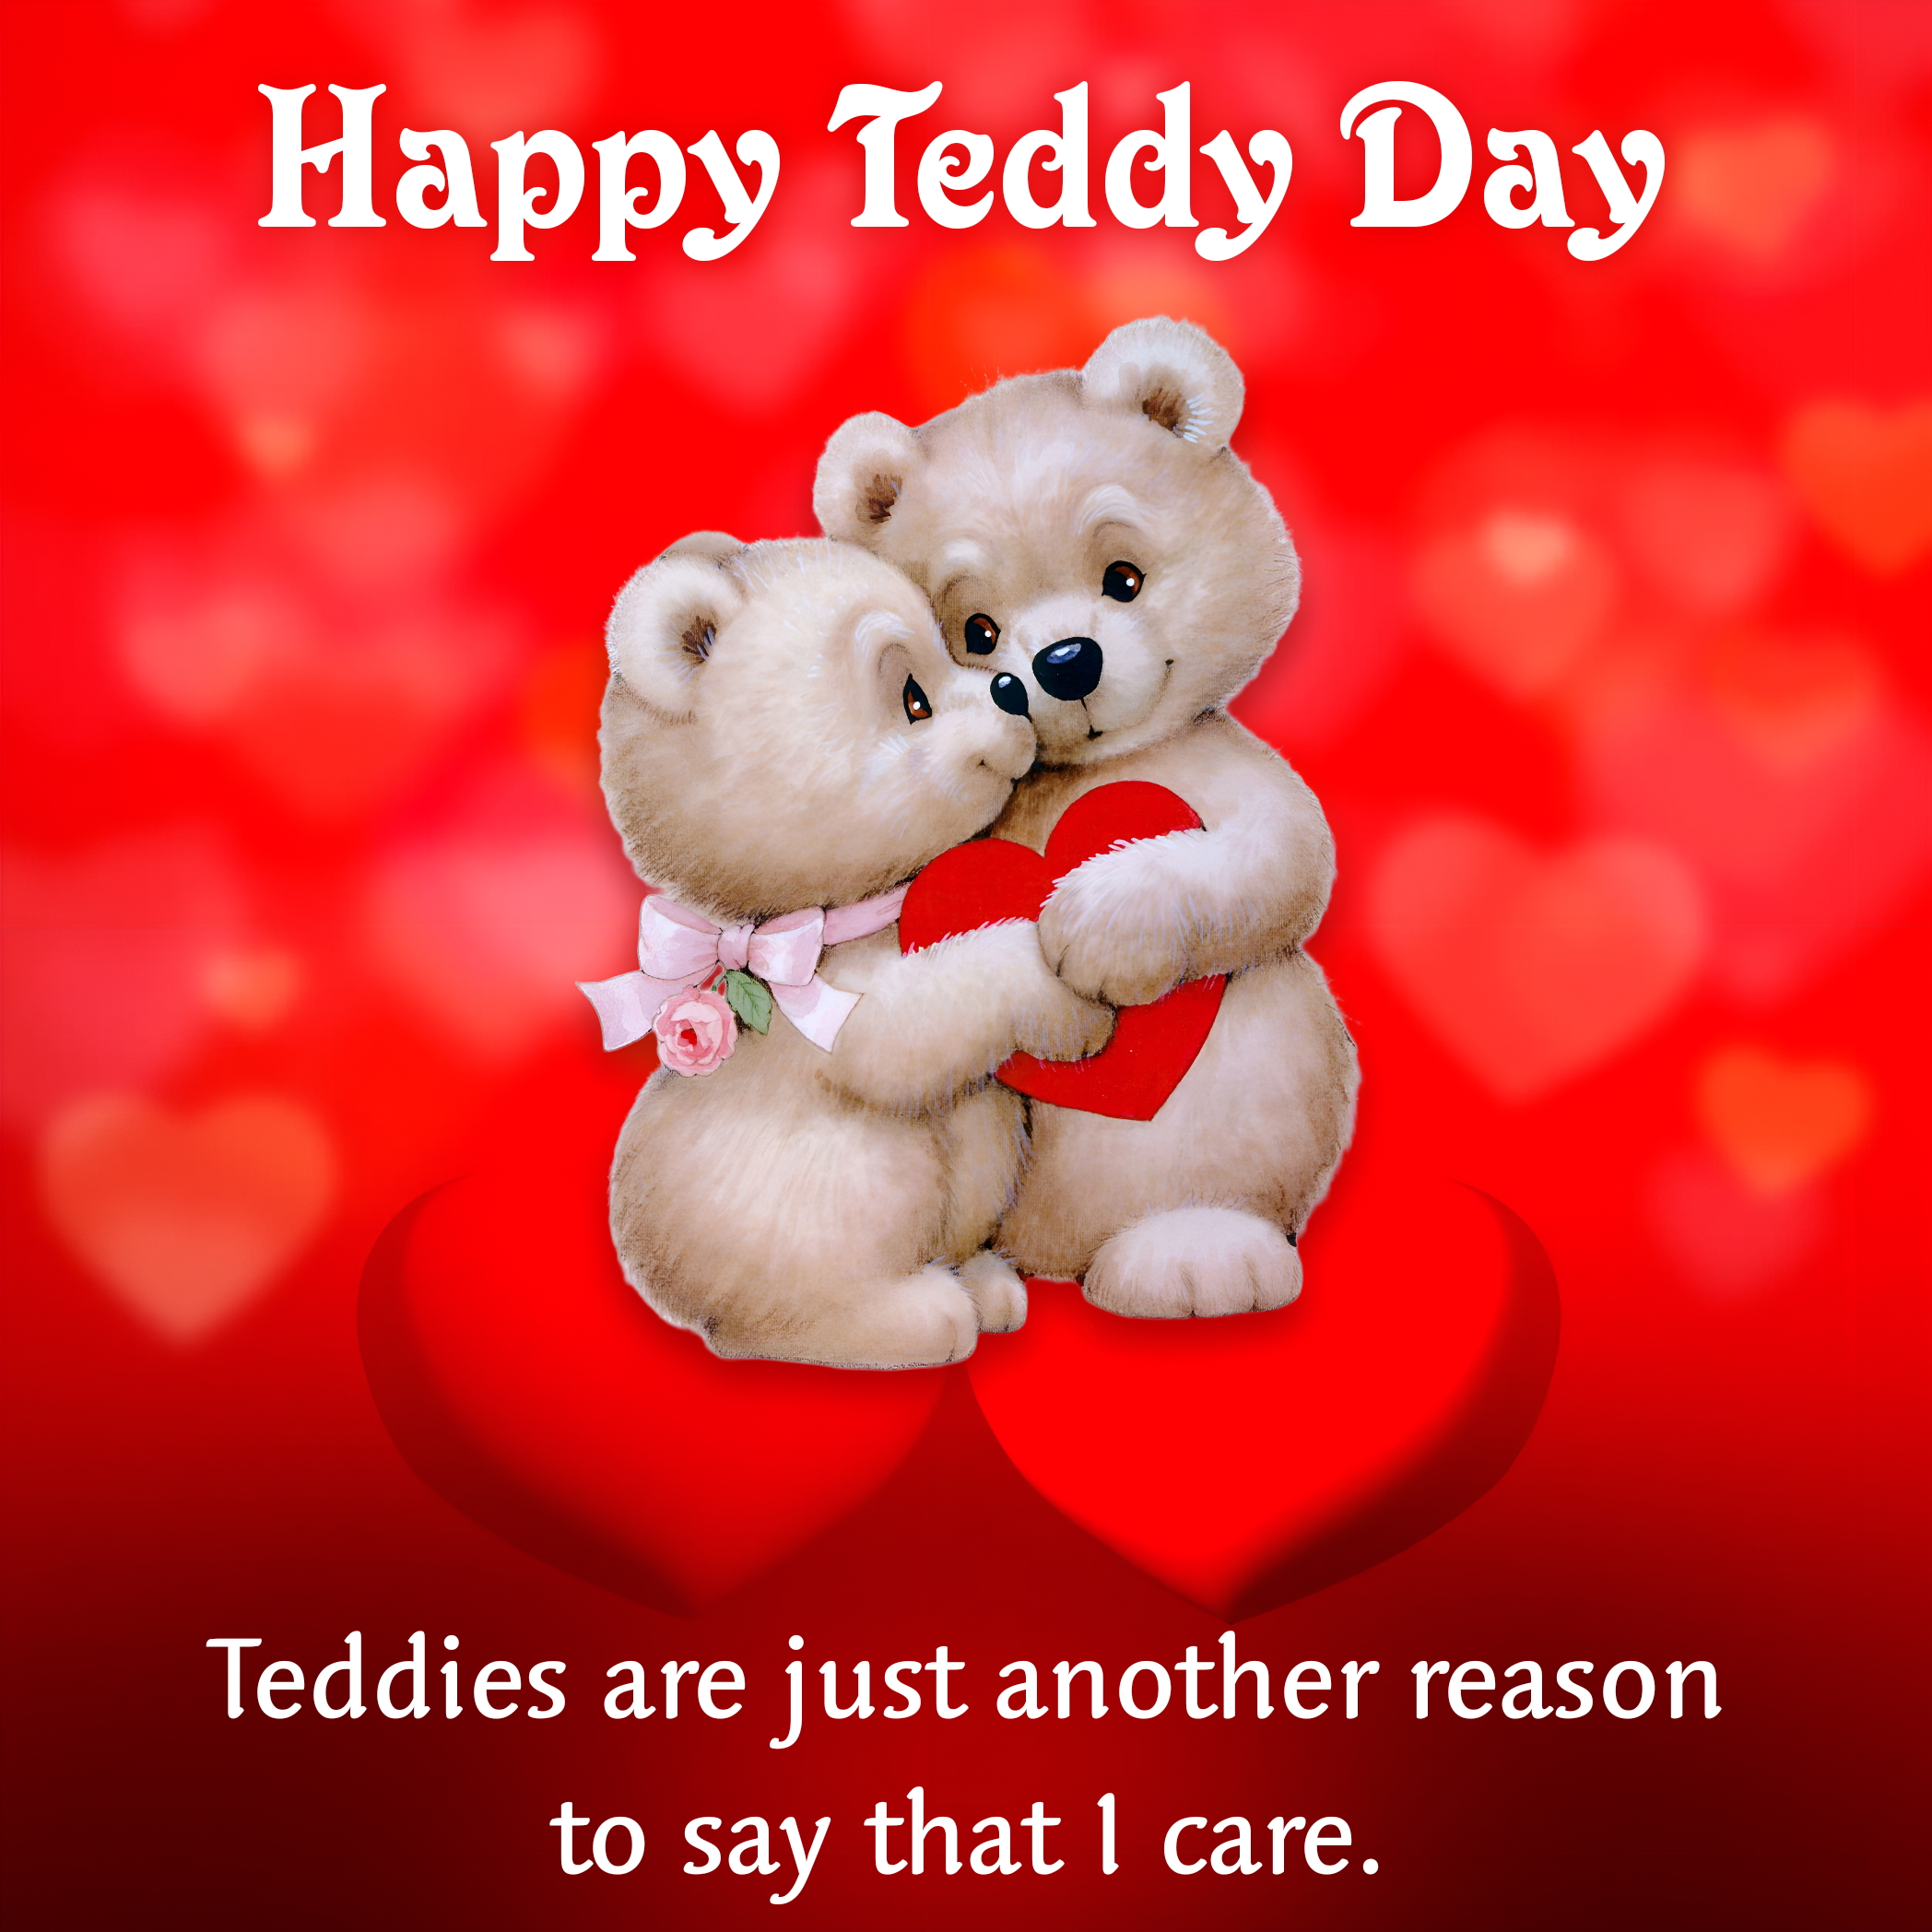 Teddies are just another reason to say that I care